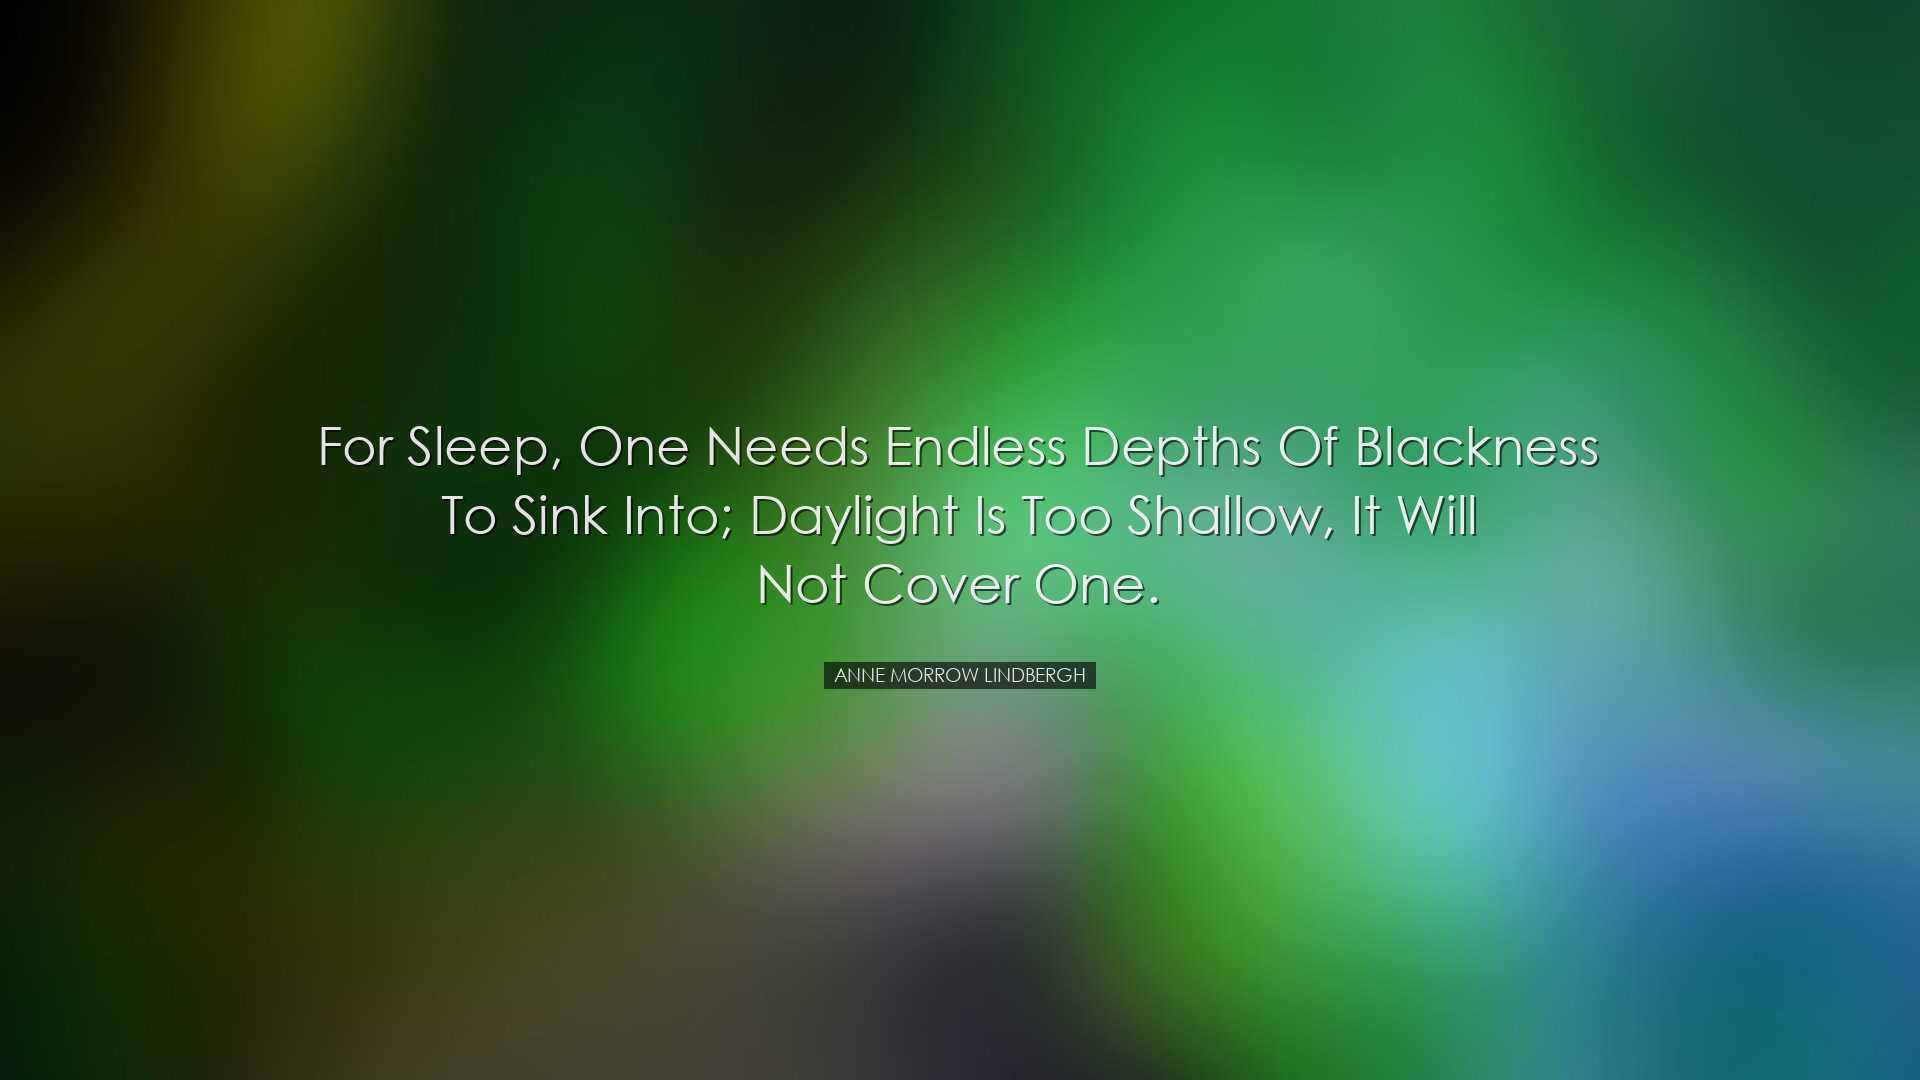 For sleep, one needs endless depths of blackness to sink into; day